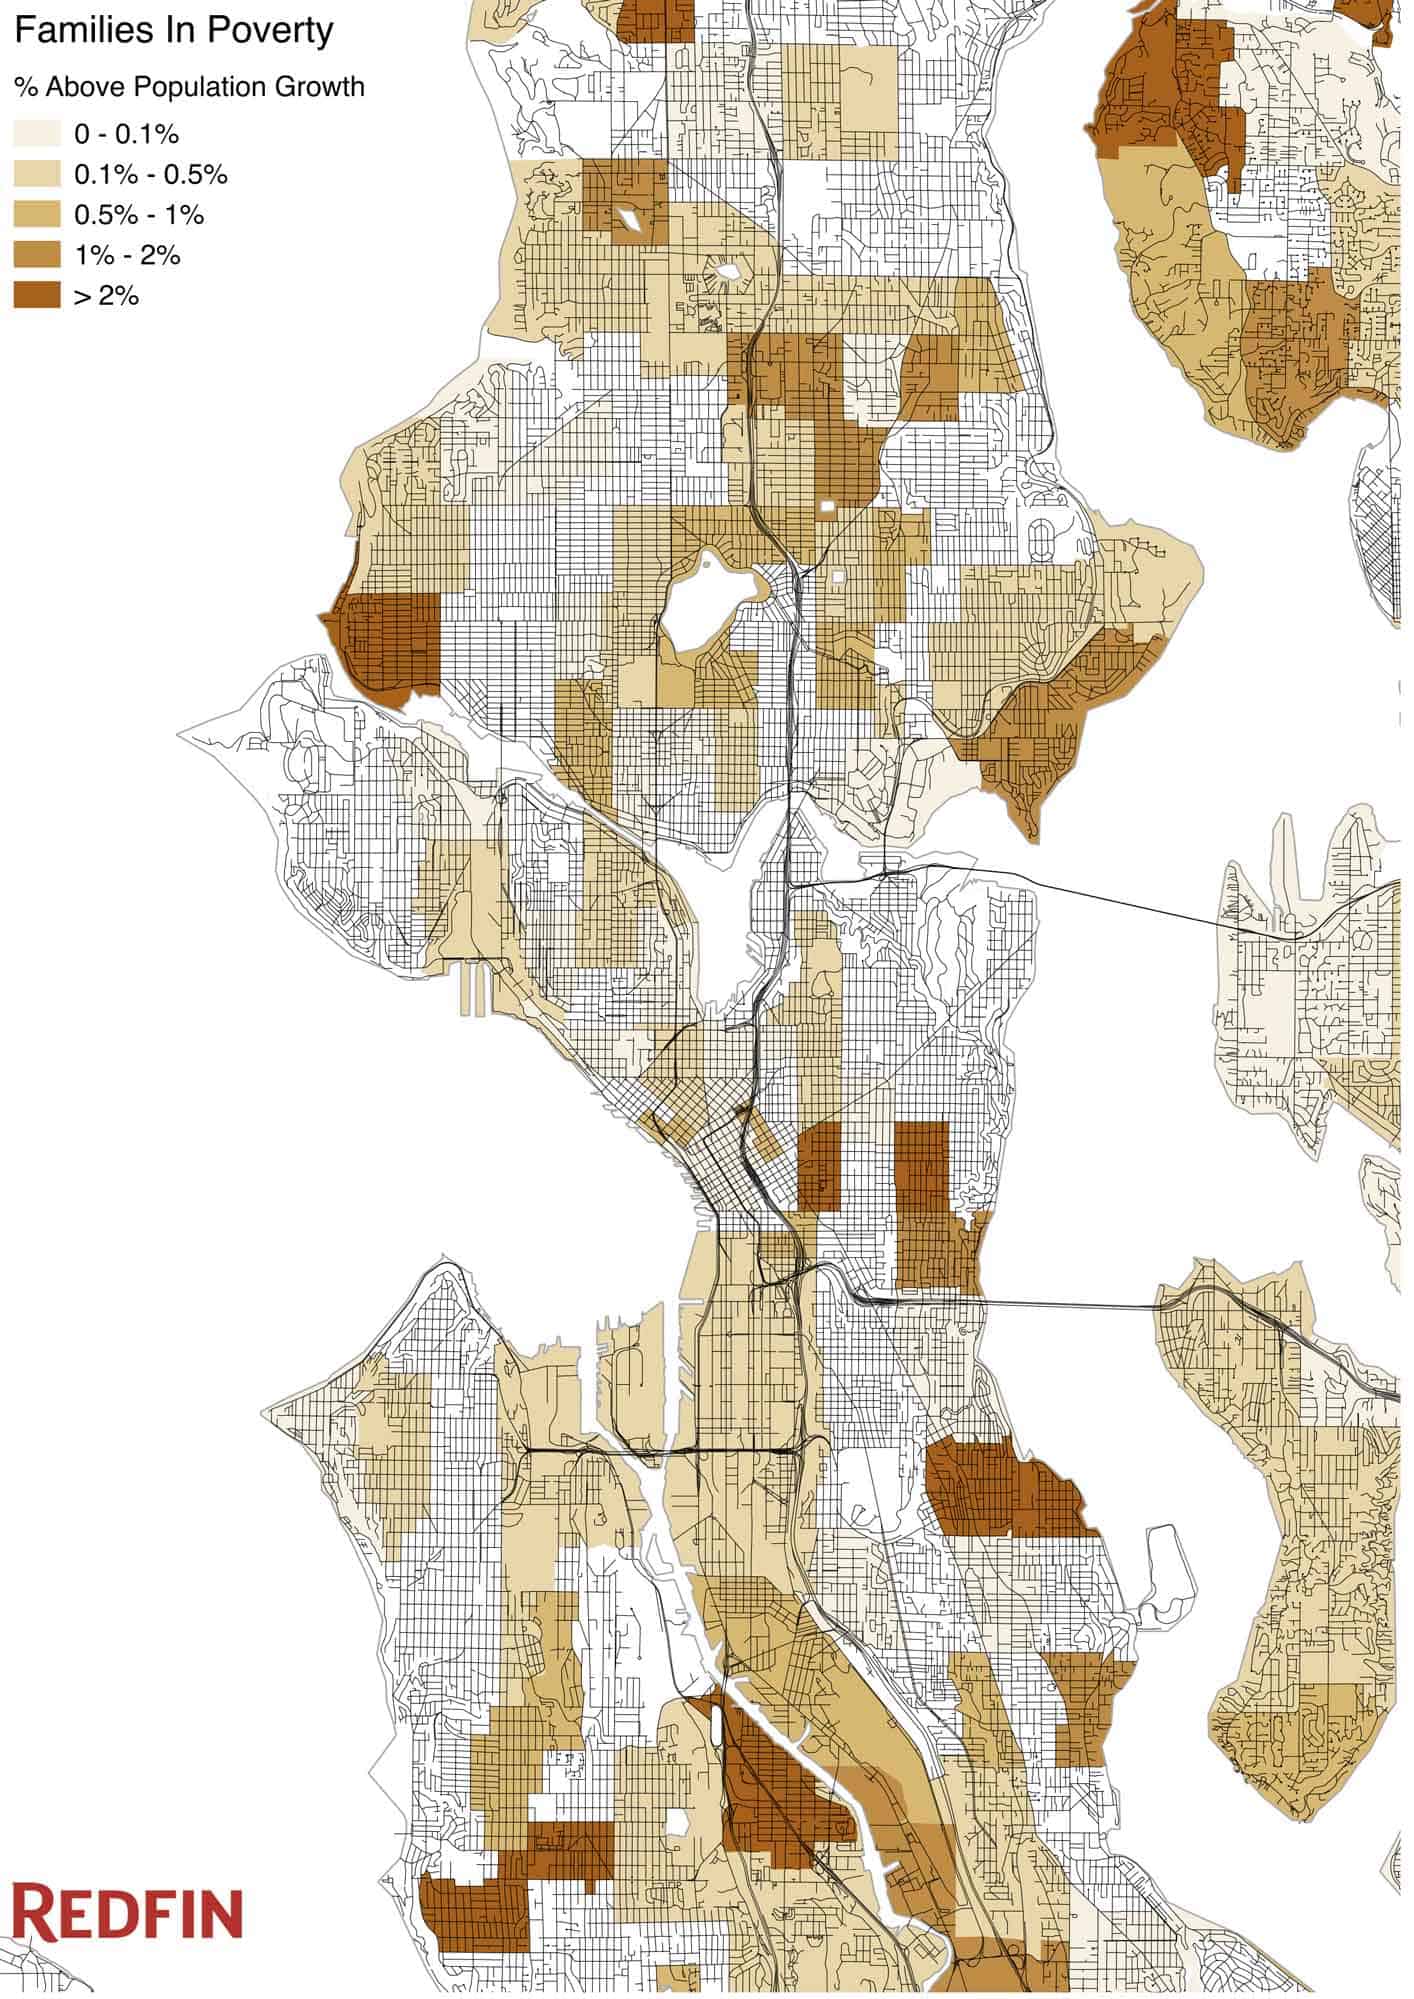 Seattle Poverty Map